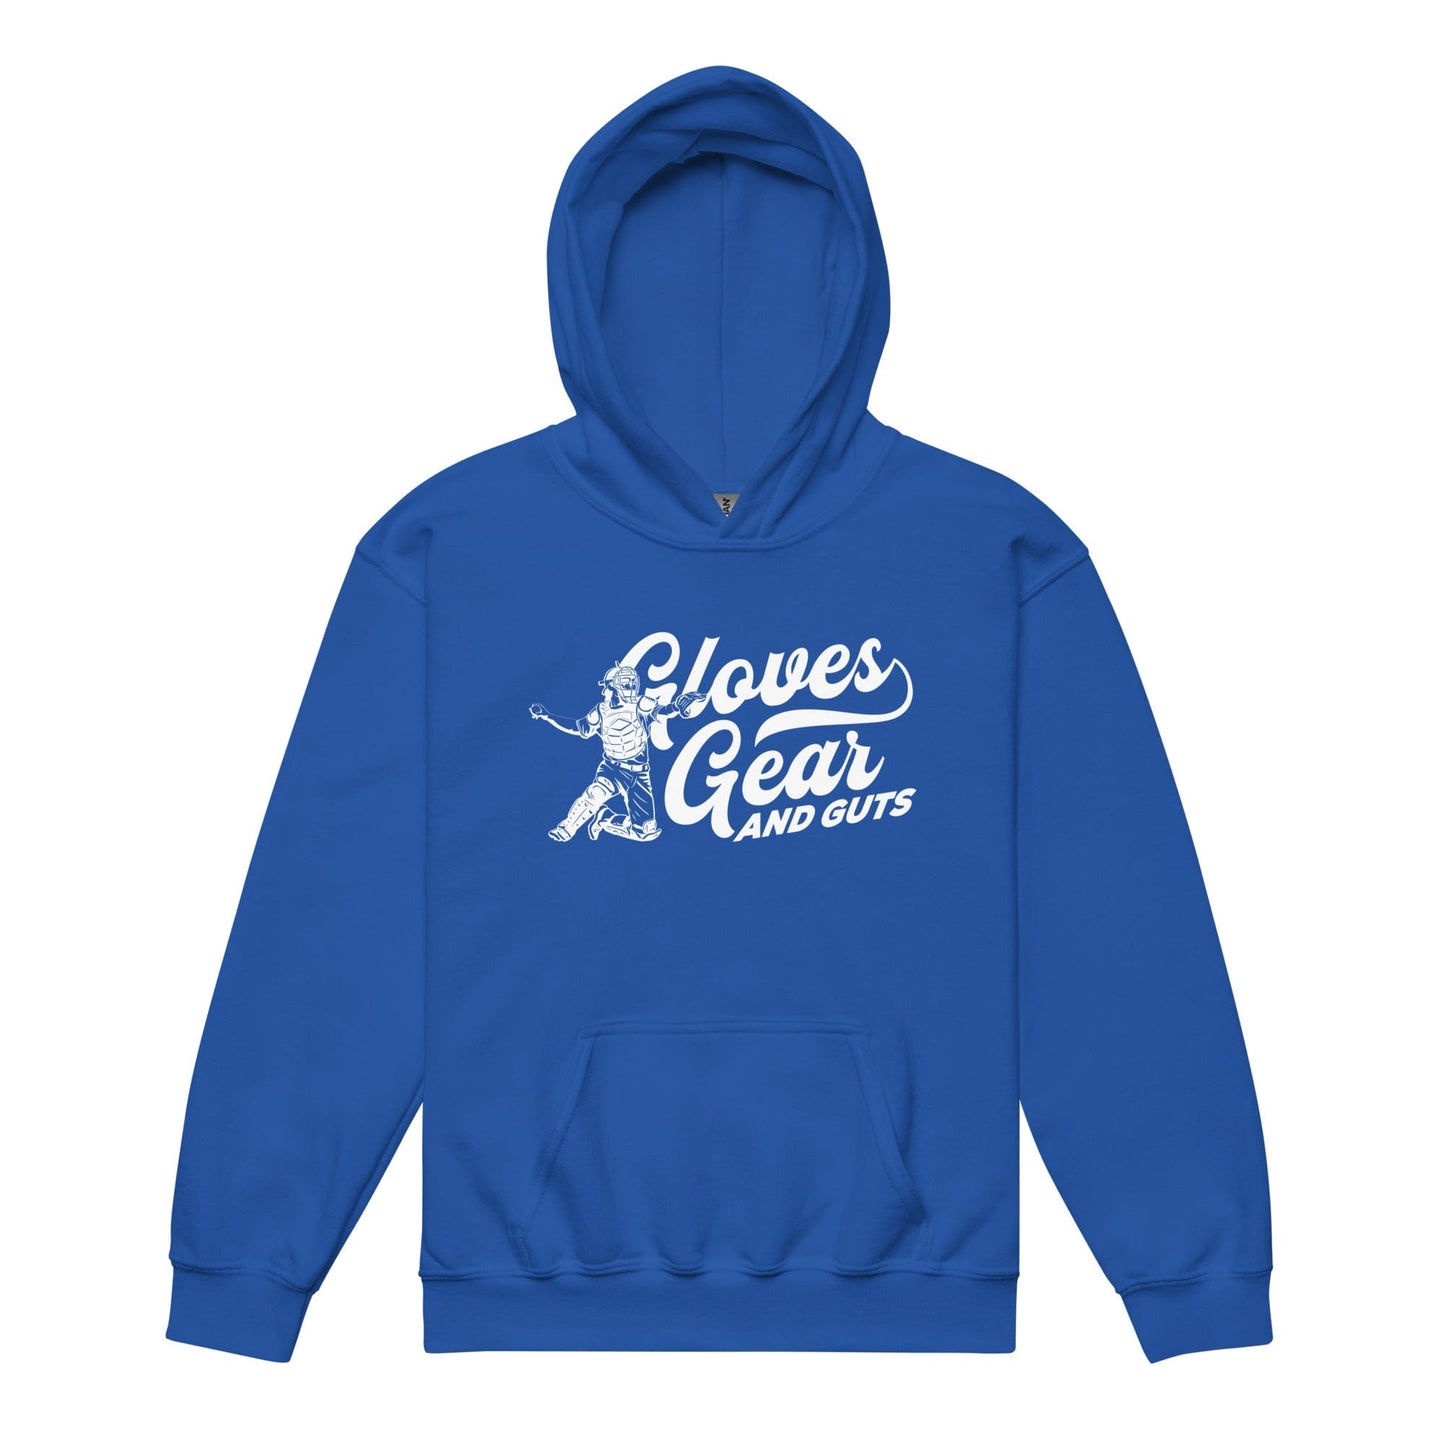 Gloves Gear And Guts - Youth Hoodie